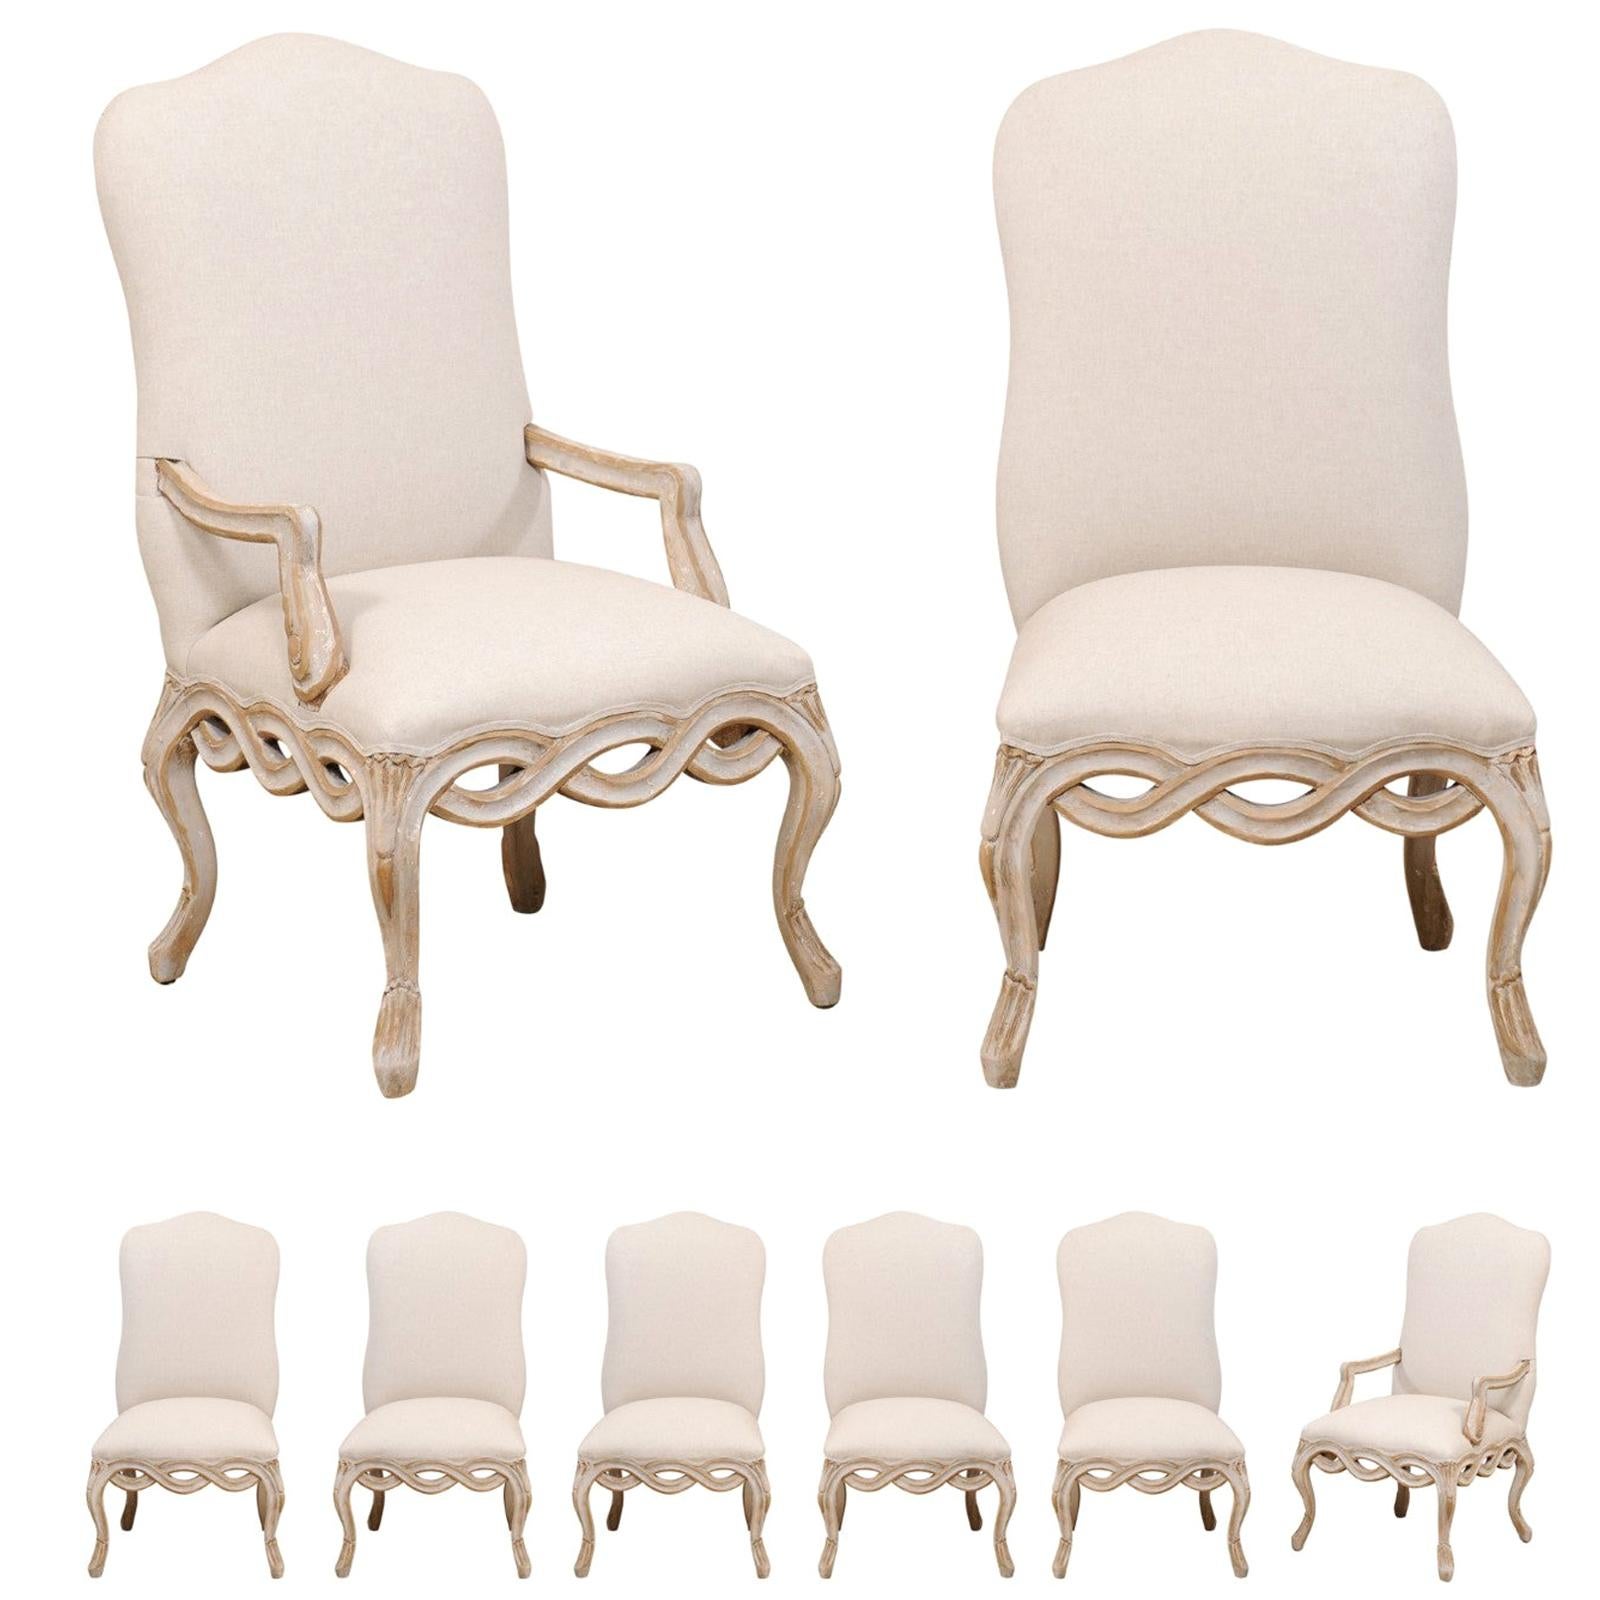 Set of 8 Venetian-Style Upholstered Dining Chairs w/ Pierce-Carved Ribbon Skirts